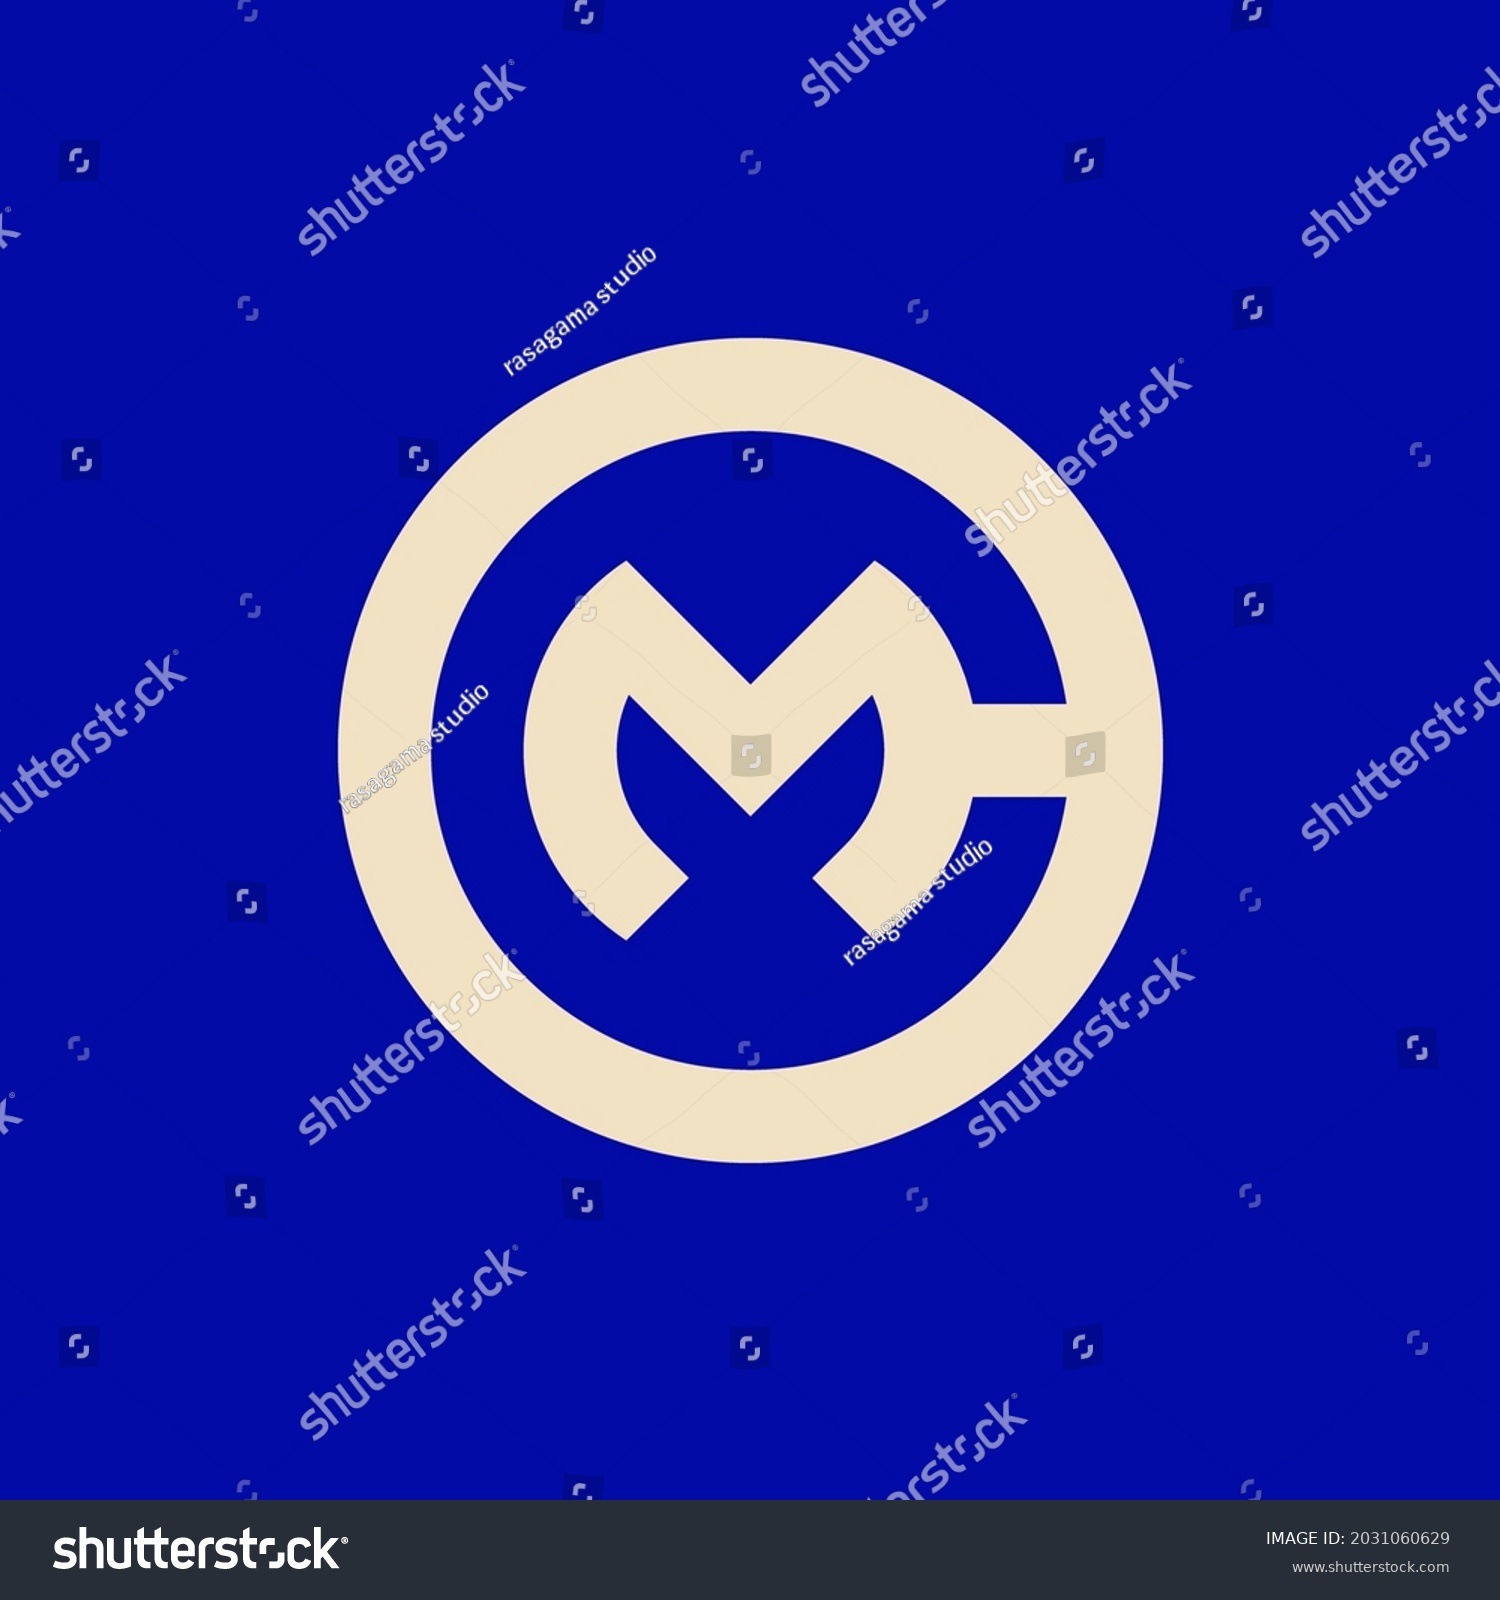 SVG of MC lettermark logo. alphabet logo that combines 2 letters into new mark or symbol that is unique and original. consists of letters M and C. svg